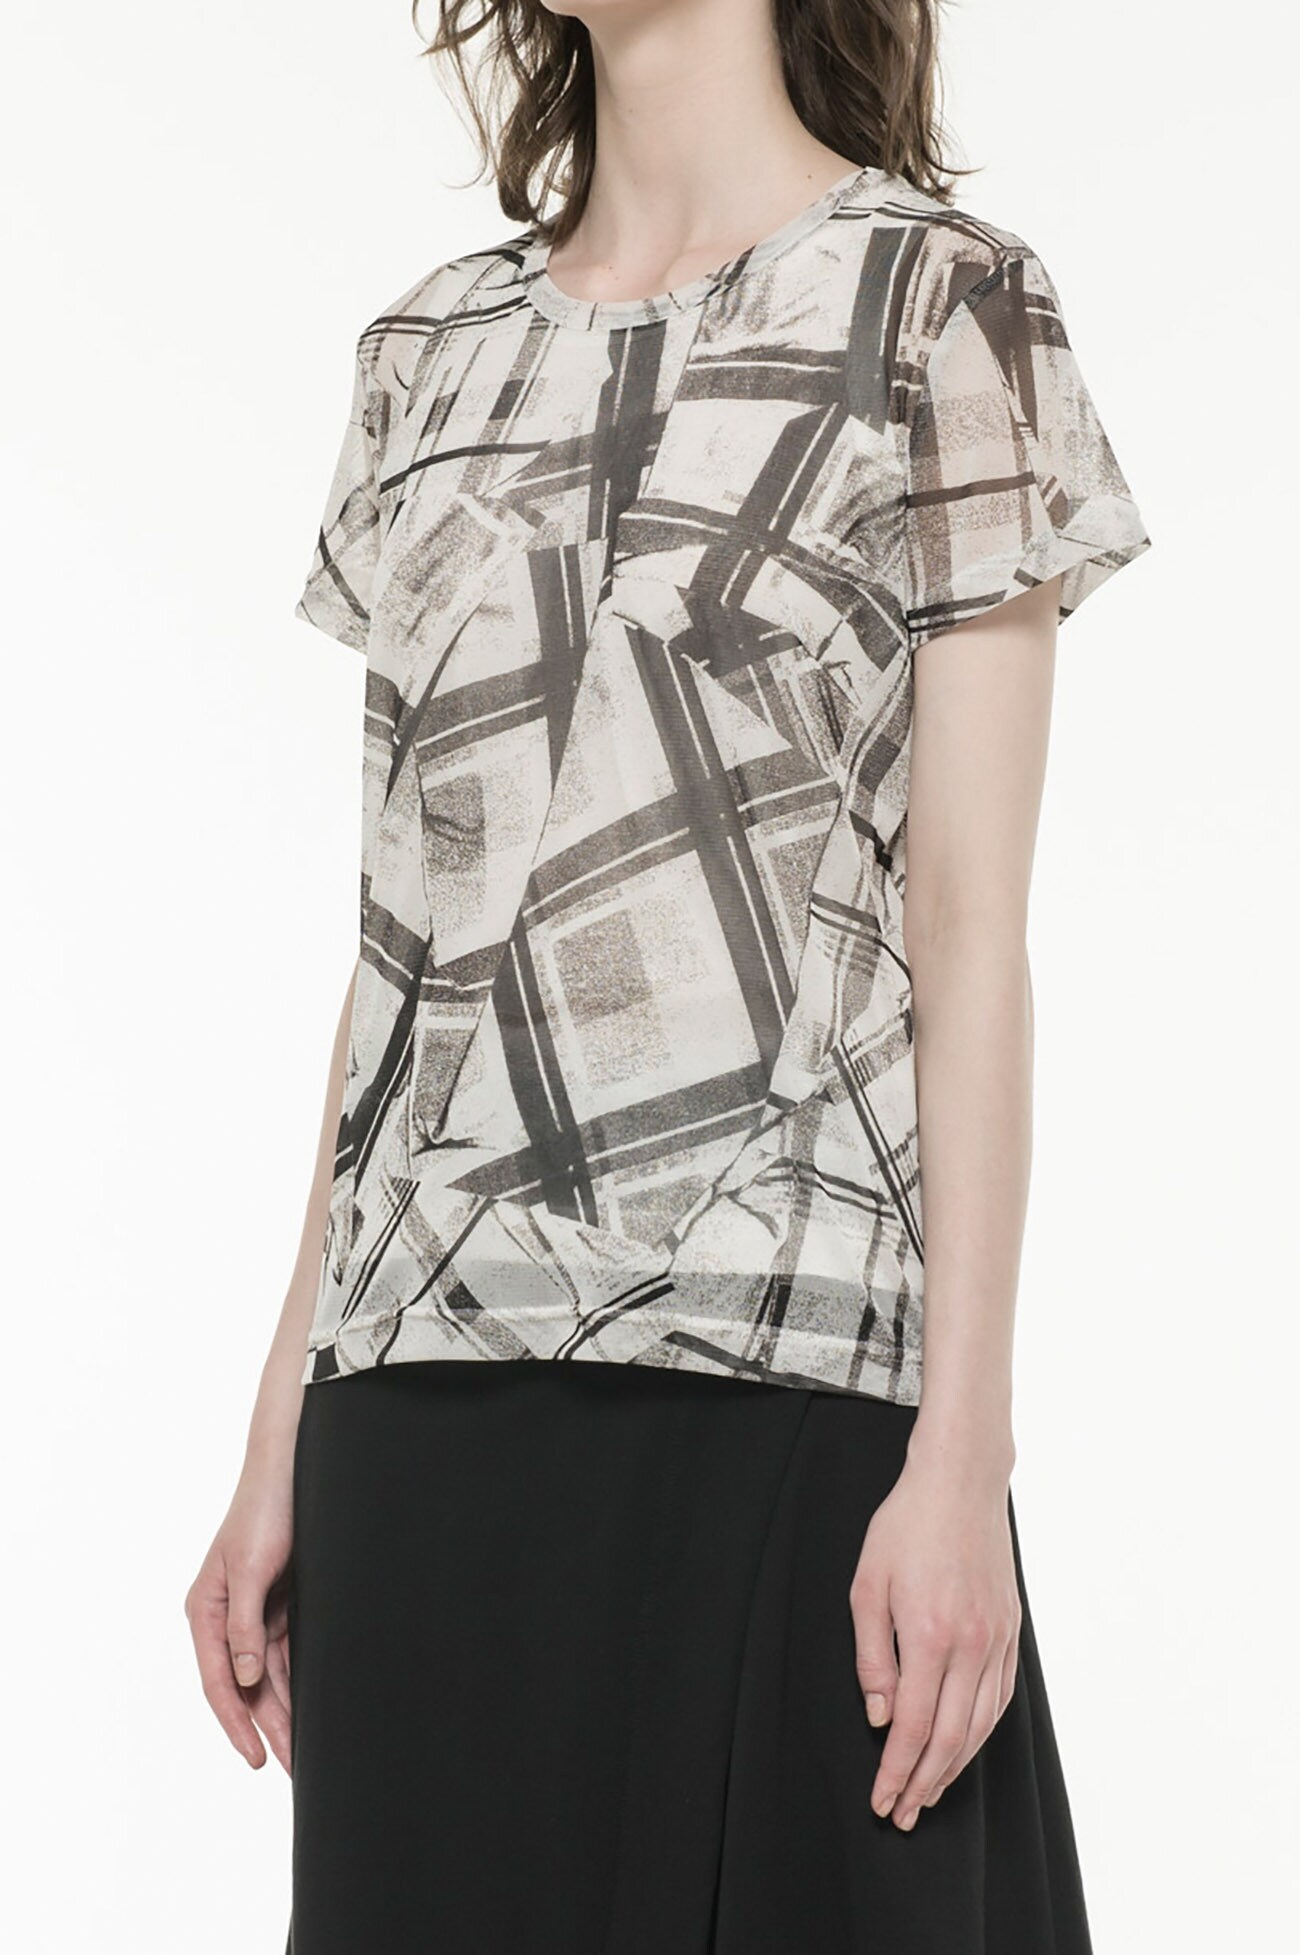 PeTULLE COLLAGE CHECK PRINT SHORT SLEEVE